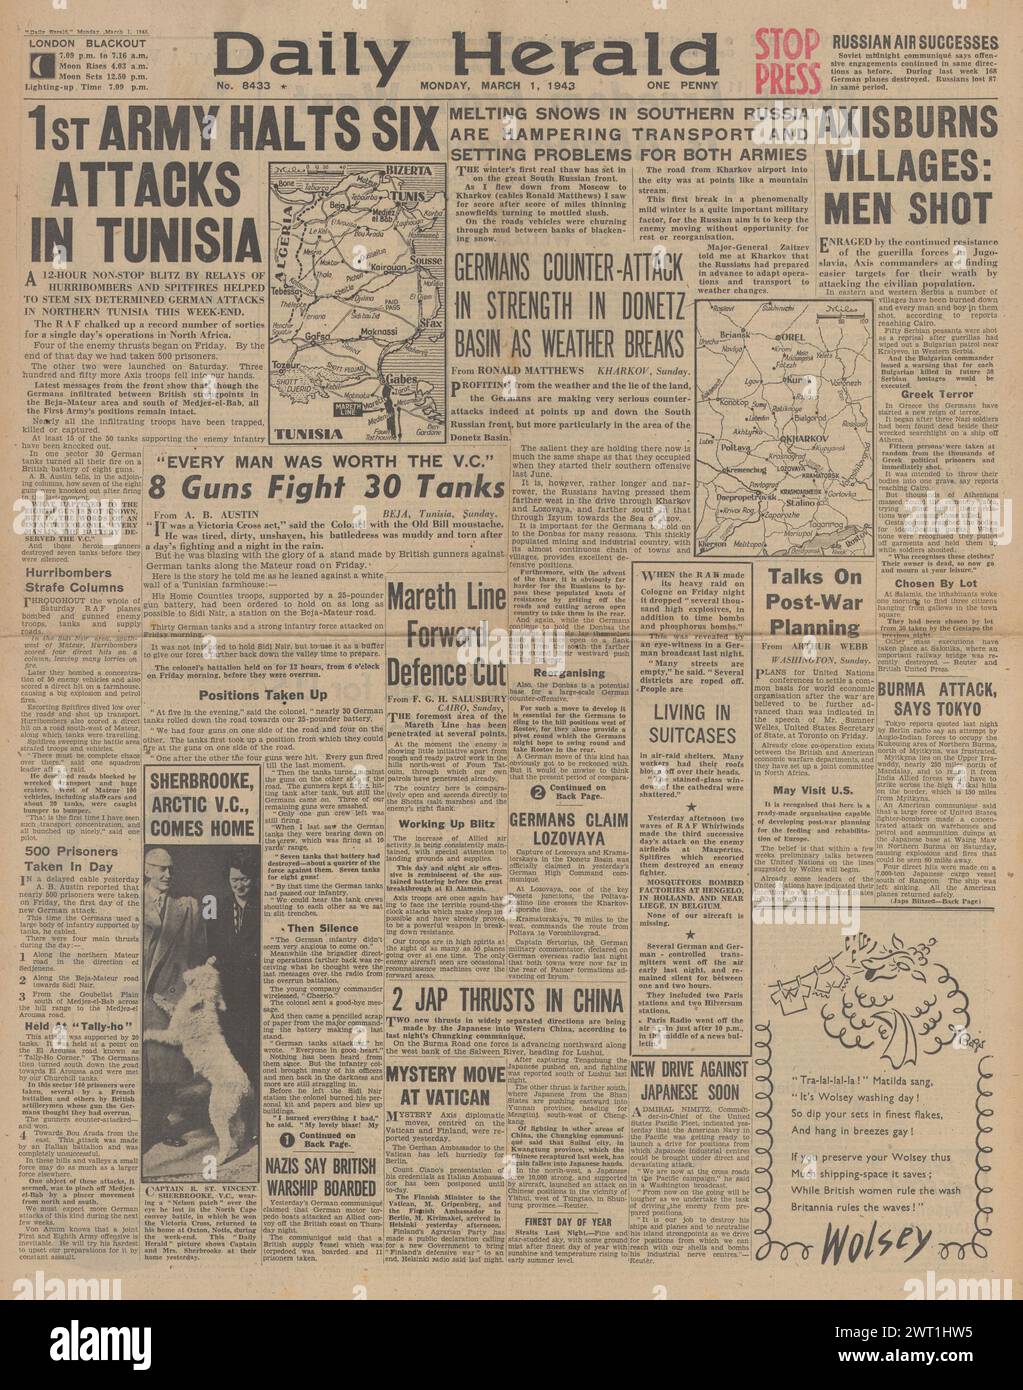 1943 Daily Herald front page reporting Battle for Tunisia, German counter attack on Eastern Front and atrocities in Serbia Stock Photo